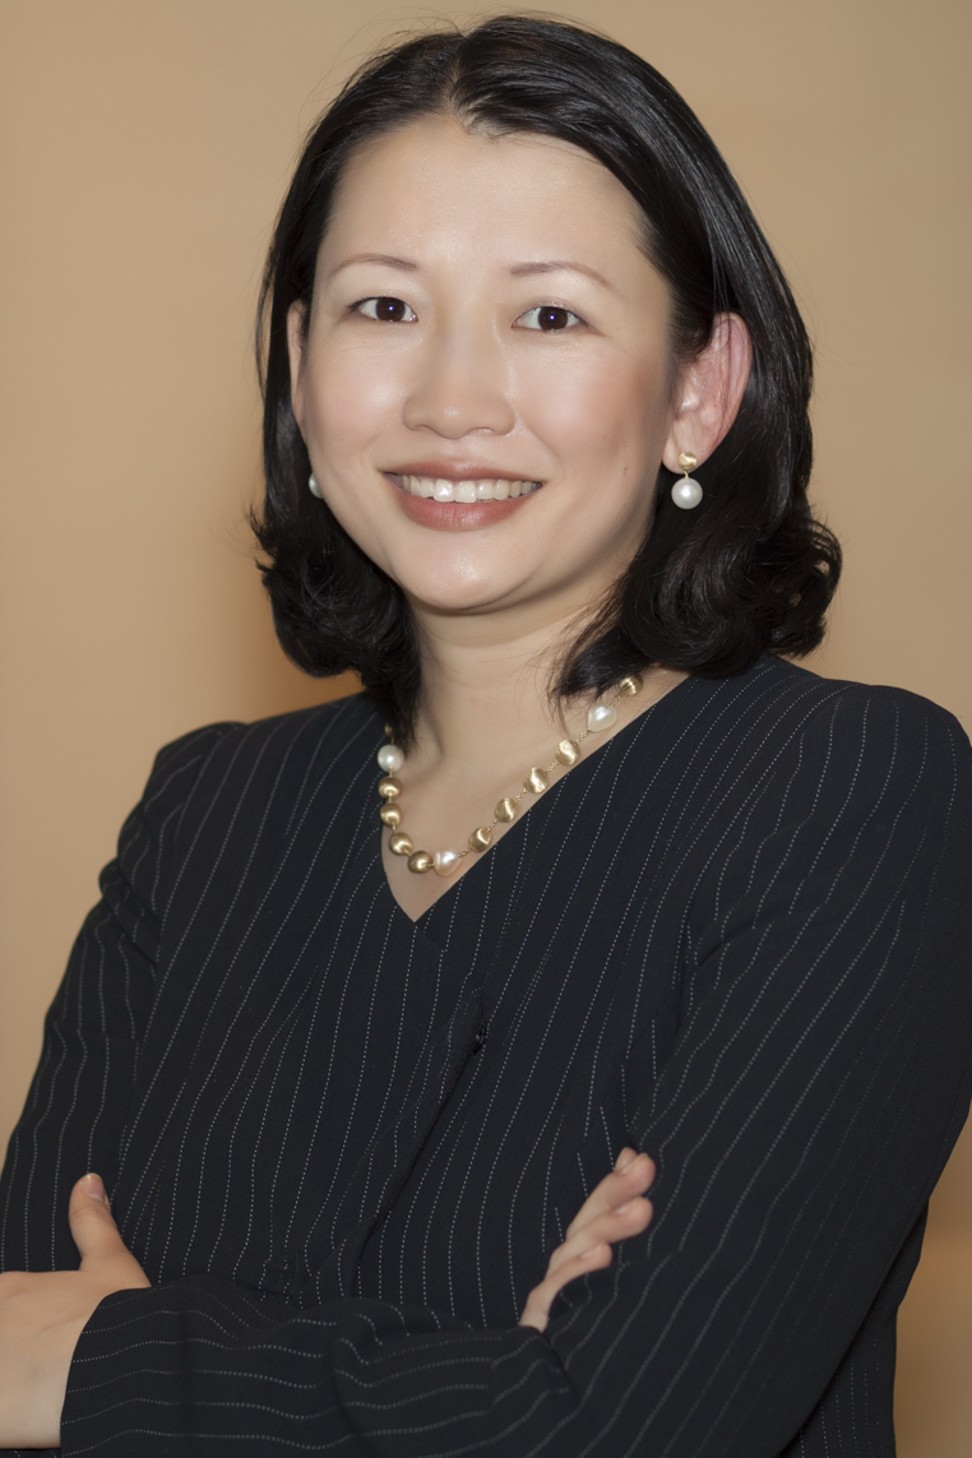 Helen Zhu, head of China equities at BlackRock, is bullish on the country’s stock markets this year. Photo: Handout